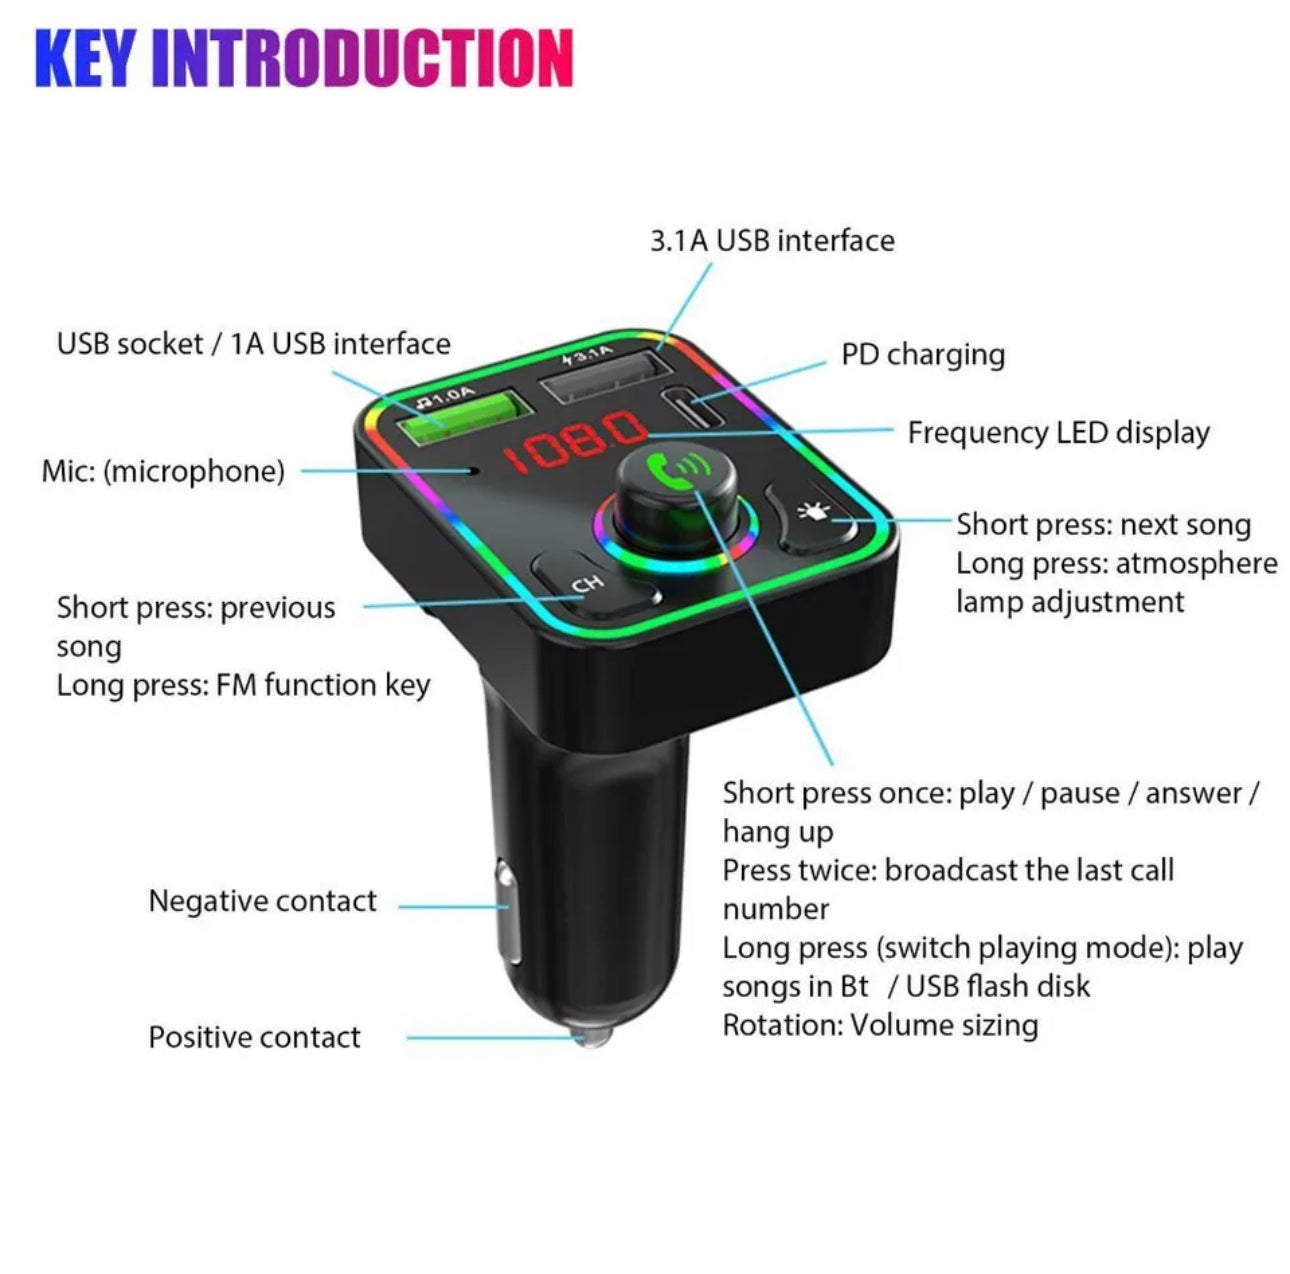 Wireless Bluetooth Car Kit FM Transmitter MP3 Player 2 USB Car Charger  Adapter